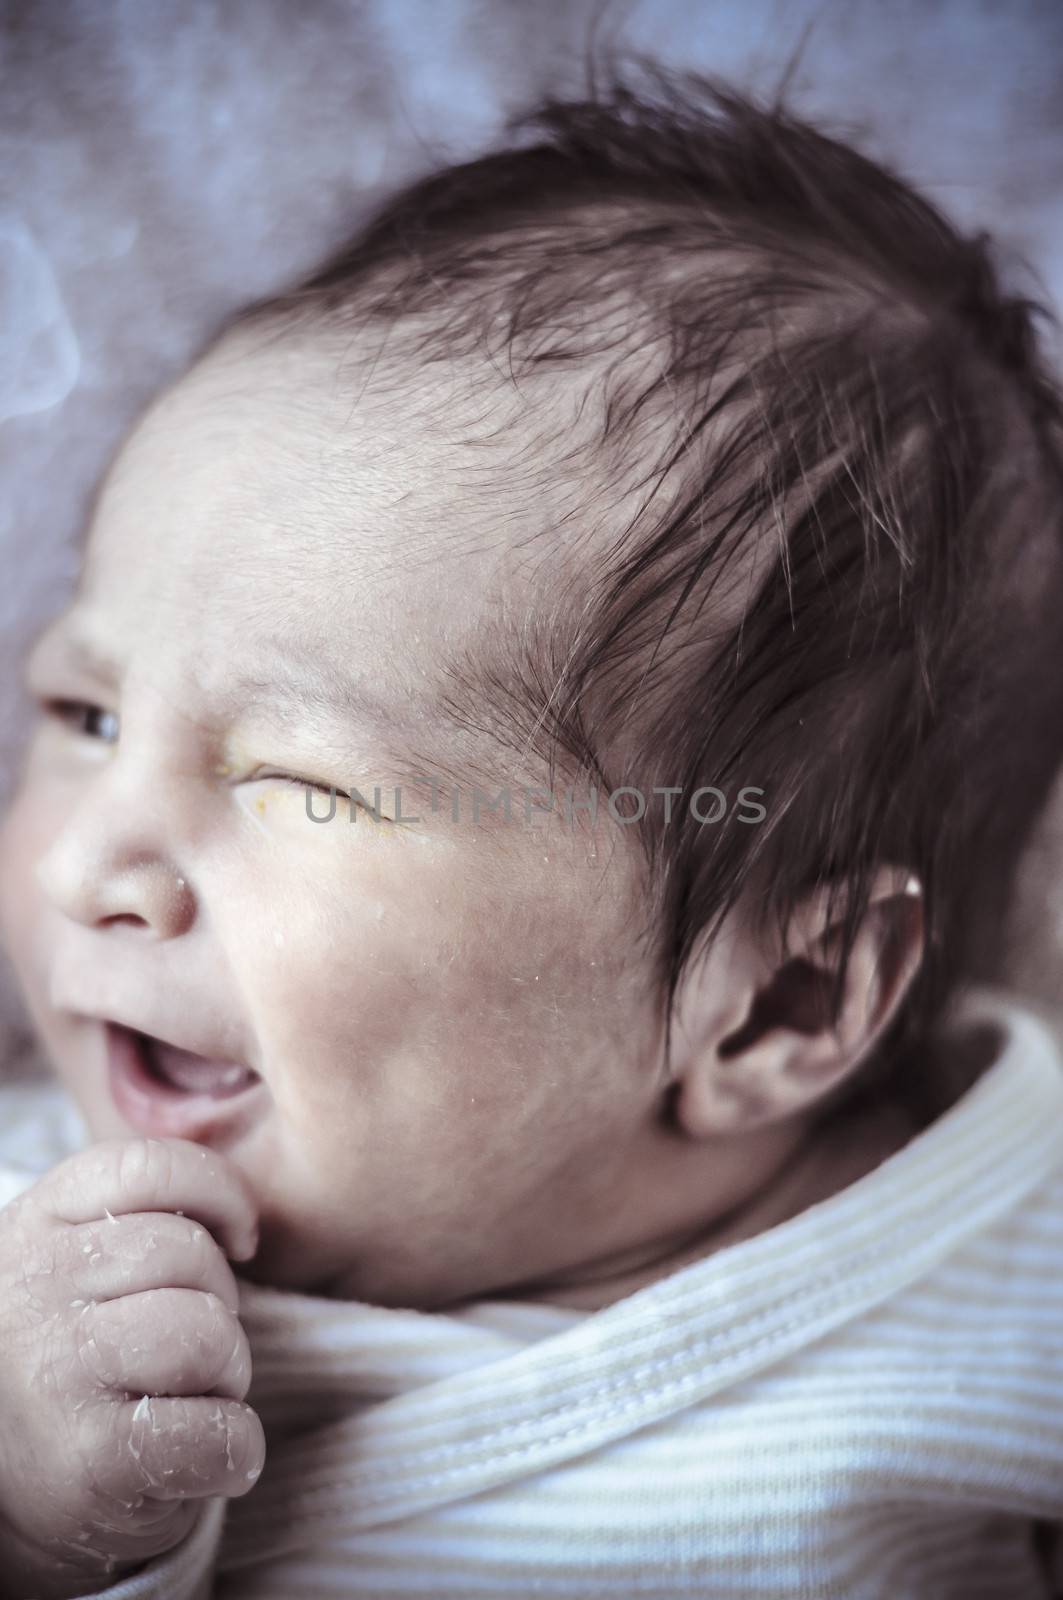 Yawn, new born baby curled up sleeping on a blanket, multiple expressions